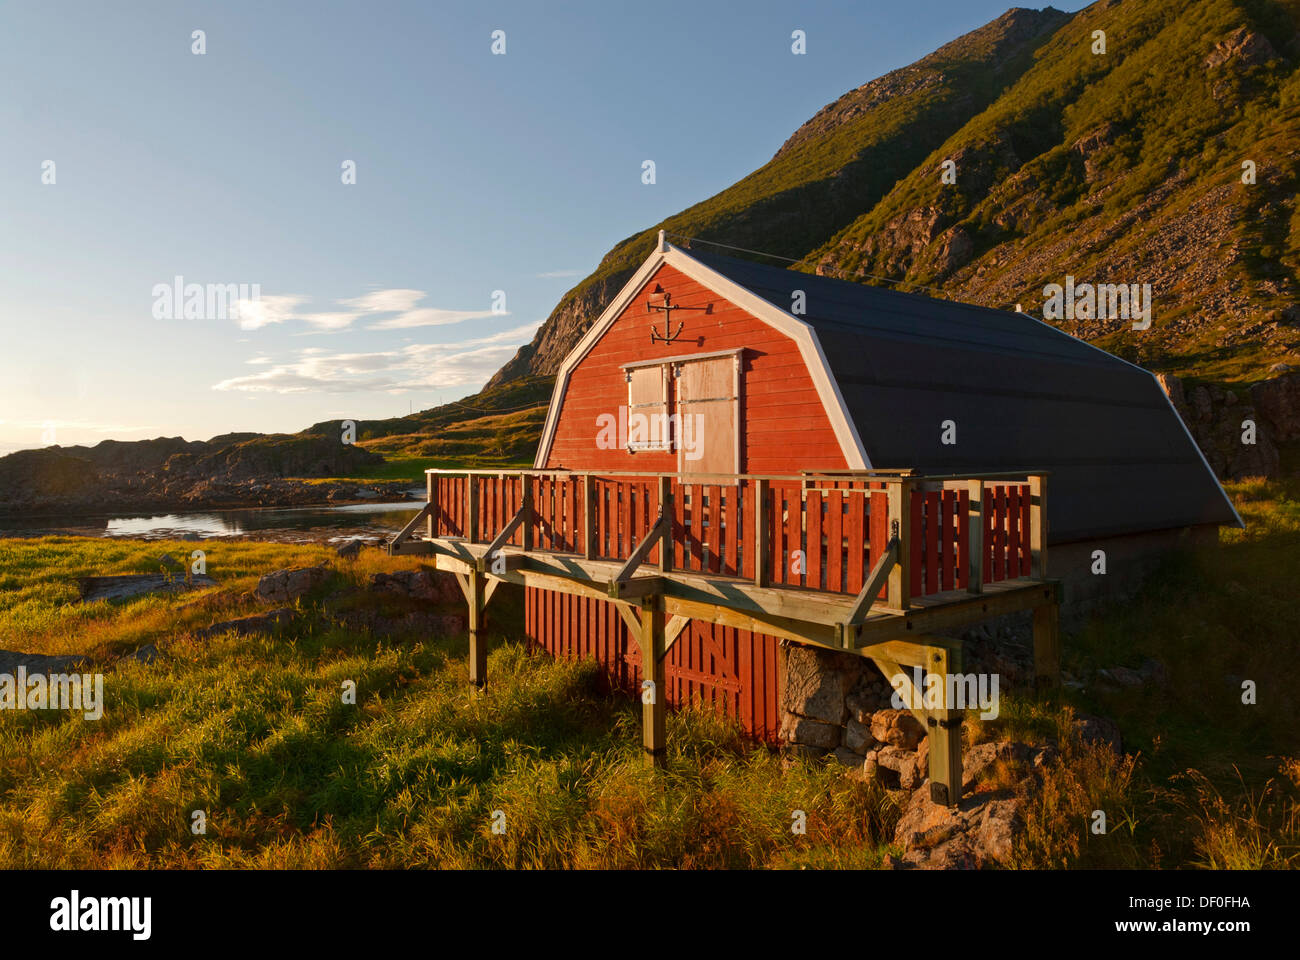 Typical red Rorbuer huts, rorbu, illuminated by warm evening light near Straume on the island of Langøya, Langoya Stock Photo